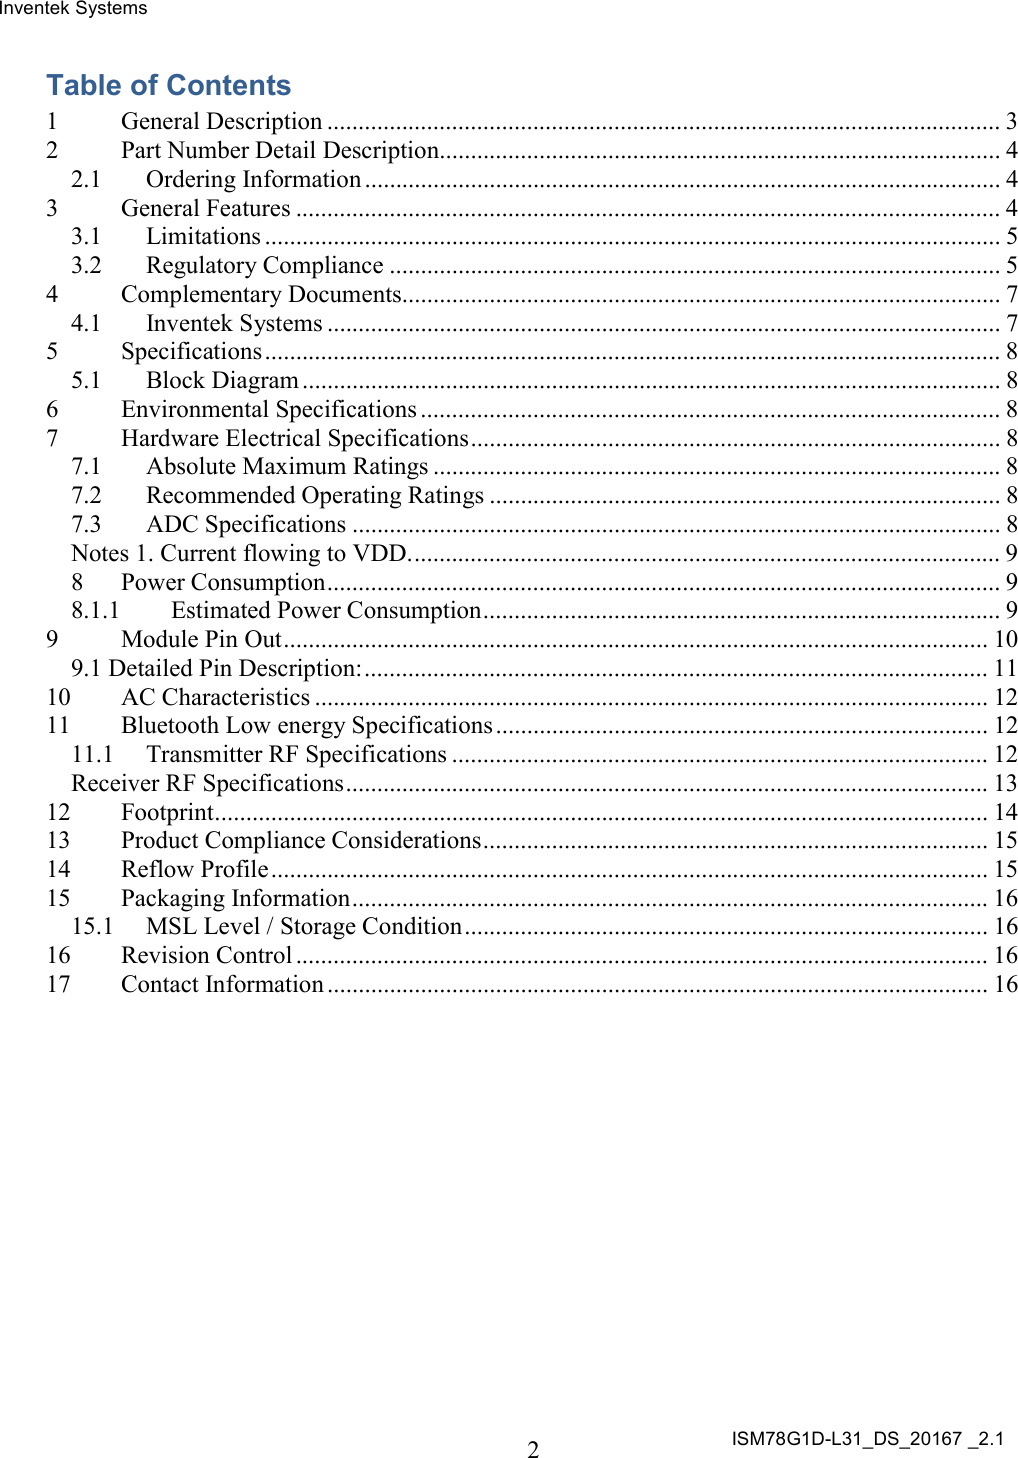 Inventek Systems ISM78G1D-L31_DS_20167 _2.1  2  Table of Contents 1 General Description ............................................................................................................ 3 2 Part Number Detail Description.......................................................................................... 4 2.1 Ordering Information ...................................................................................................... 4 3 General Features ................................................................................................................. 4 3.1 Limitations ...................................................................................................................... 5 3.2 Regulatory Compliance .................................................................................................. 5 4 Complementary Documents................................................................................................ 7 4.1 Inventek Systems ............................................................................................................ 7 5 Specifications ...................................................................................................................... 8 5.1 Block Diagram ................................................................................................................ 8 6 Environmental Specifications ............................................................................................. 8 7 Hardware Electrical Specifications ..................................................................................... 8 7.1 Absolute Maximum Ratings ........................................................................................... 8 7.2 Recommended Operating Ratings .................................................................................. 8 7.3 ADC Specifications ........................................................................................................ 8 Notes 1. Current flowing to VDD. .............................................................................................. 9 8 Power Consumption ............................................................................................................ 9 8.1.1 Estimated Power Consumption ................................................................................... 9 9 Module Pin Out ................................................................................................................. 10 9.1 Detailed Pin Description: .................................................................................................... 11 10 AC Characteristics ............................................................................................................ 12 11 Bluetooth Low energy Specifications ............................................................................... 12 11.1 Transmitter RF Specifications ...................................................................................... 12 Receiver RF Specifications ....................................................................................................... 13 12 Footprint ............................................................................................................................ 14 13 Product Compliance Considerations ................................................................................. 15 14 Reflow Profile ................................................................................................................... 15 15 Packaging Information ...................................................................................................... 16 15.1 MSL Level / Storage Condition .................................................................................... 16 16 Revision Control ............................................................................................................... 16 17 Contact Information .......................................................................................................... 16     